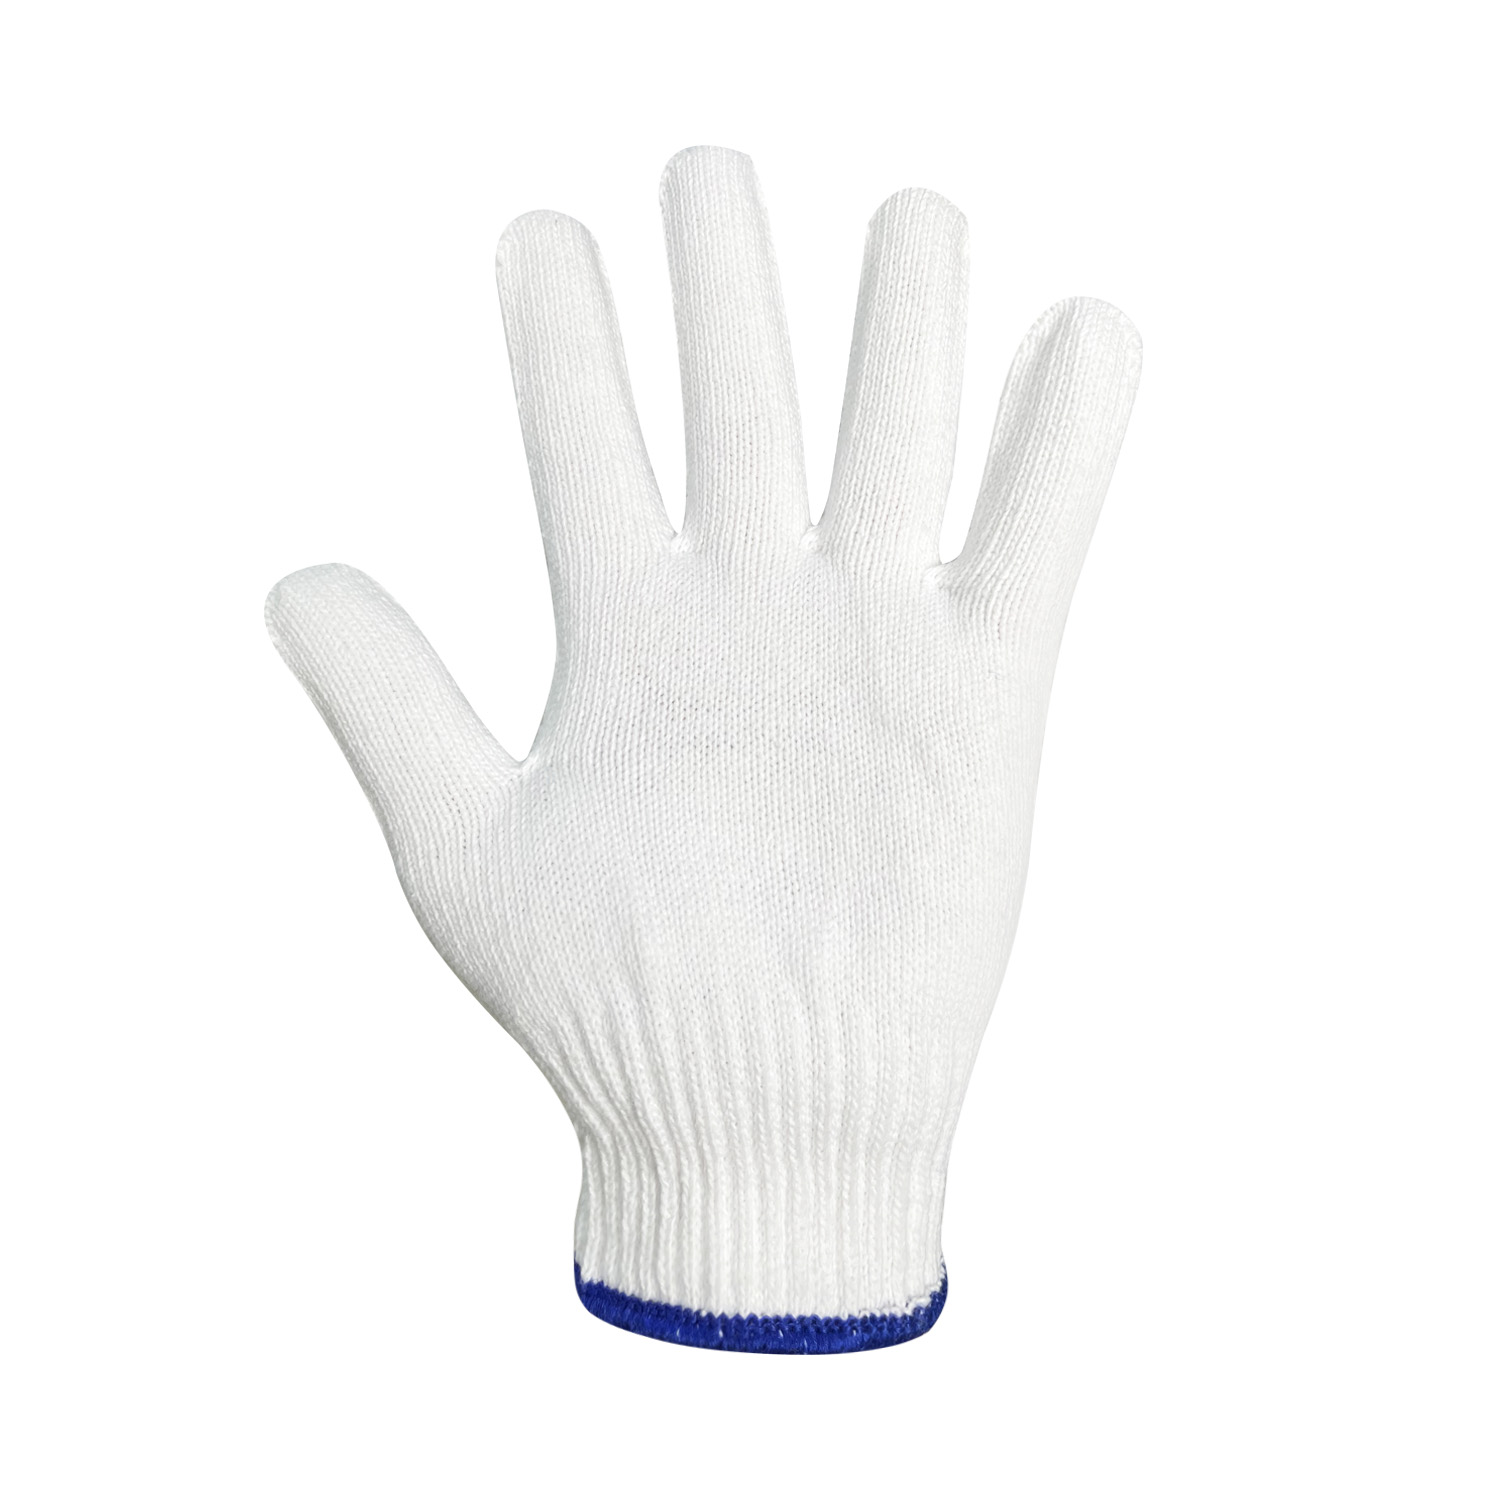 China Wholesale 7/10gauge White Cotton Knitted Glove Working Guante Safety Work Gloves